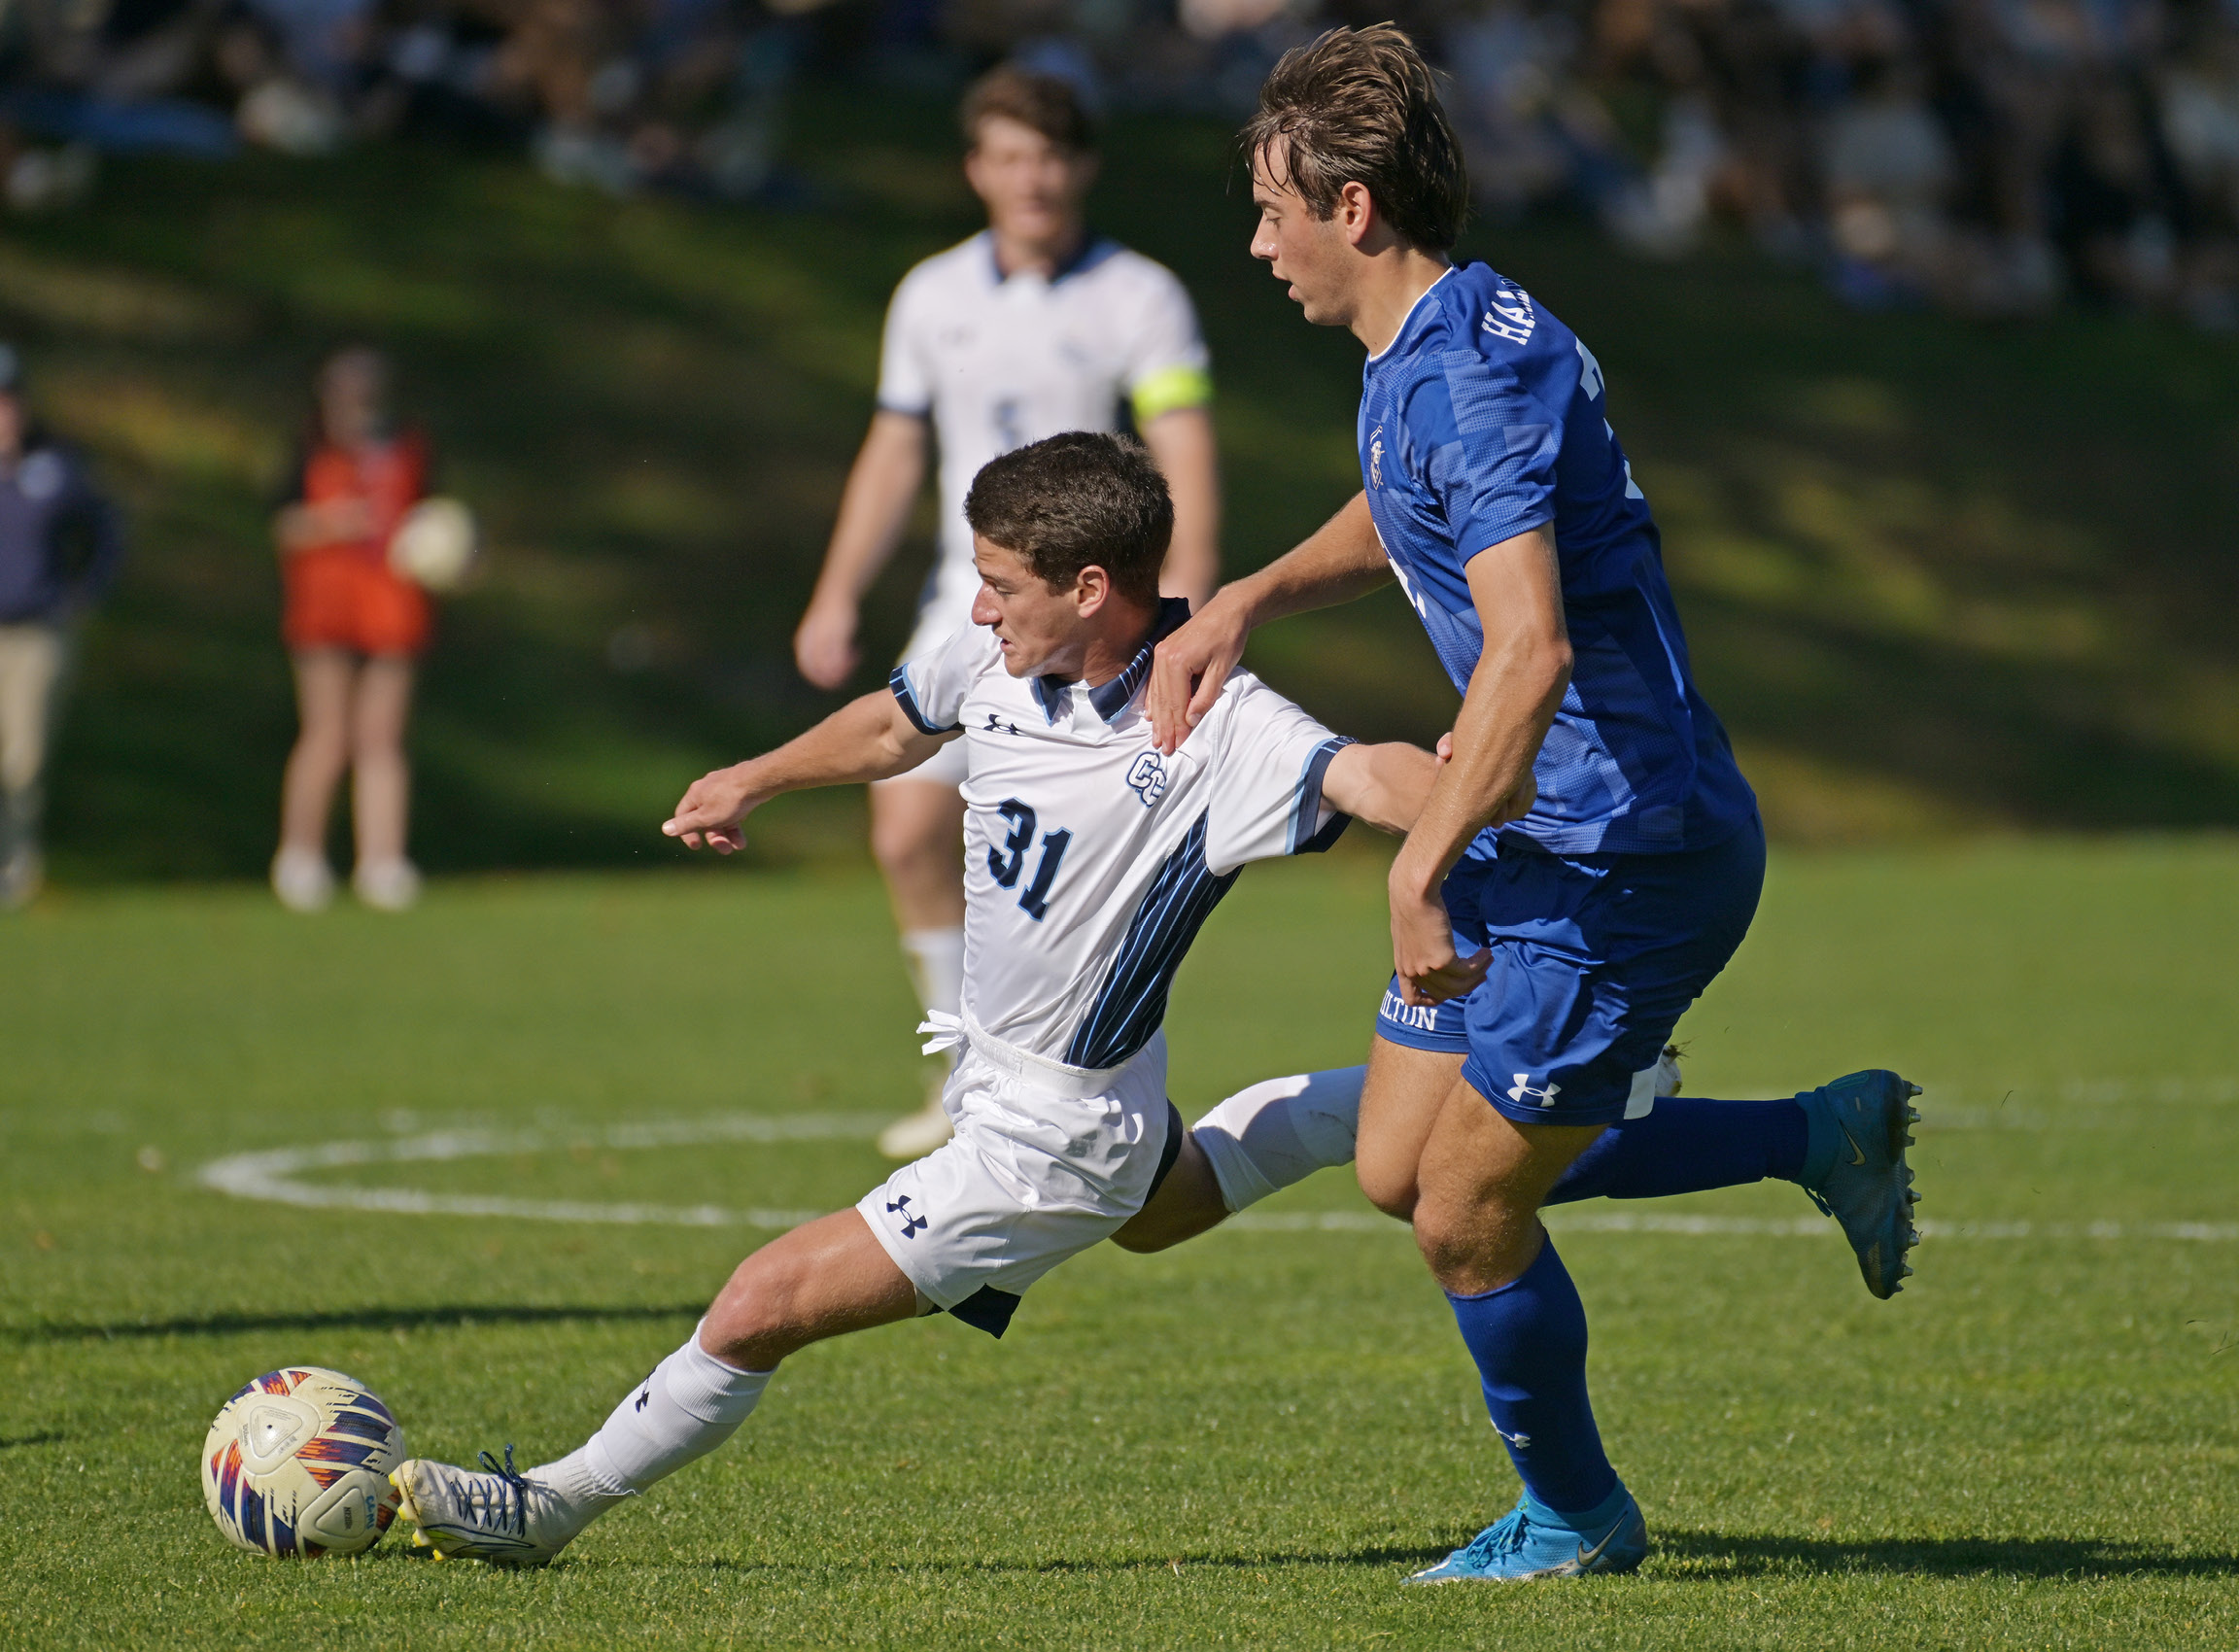 Jake Creus '24 powers past a Coast Guard player in non-league men’s soccer action Tuesday, October 10, 2023